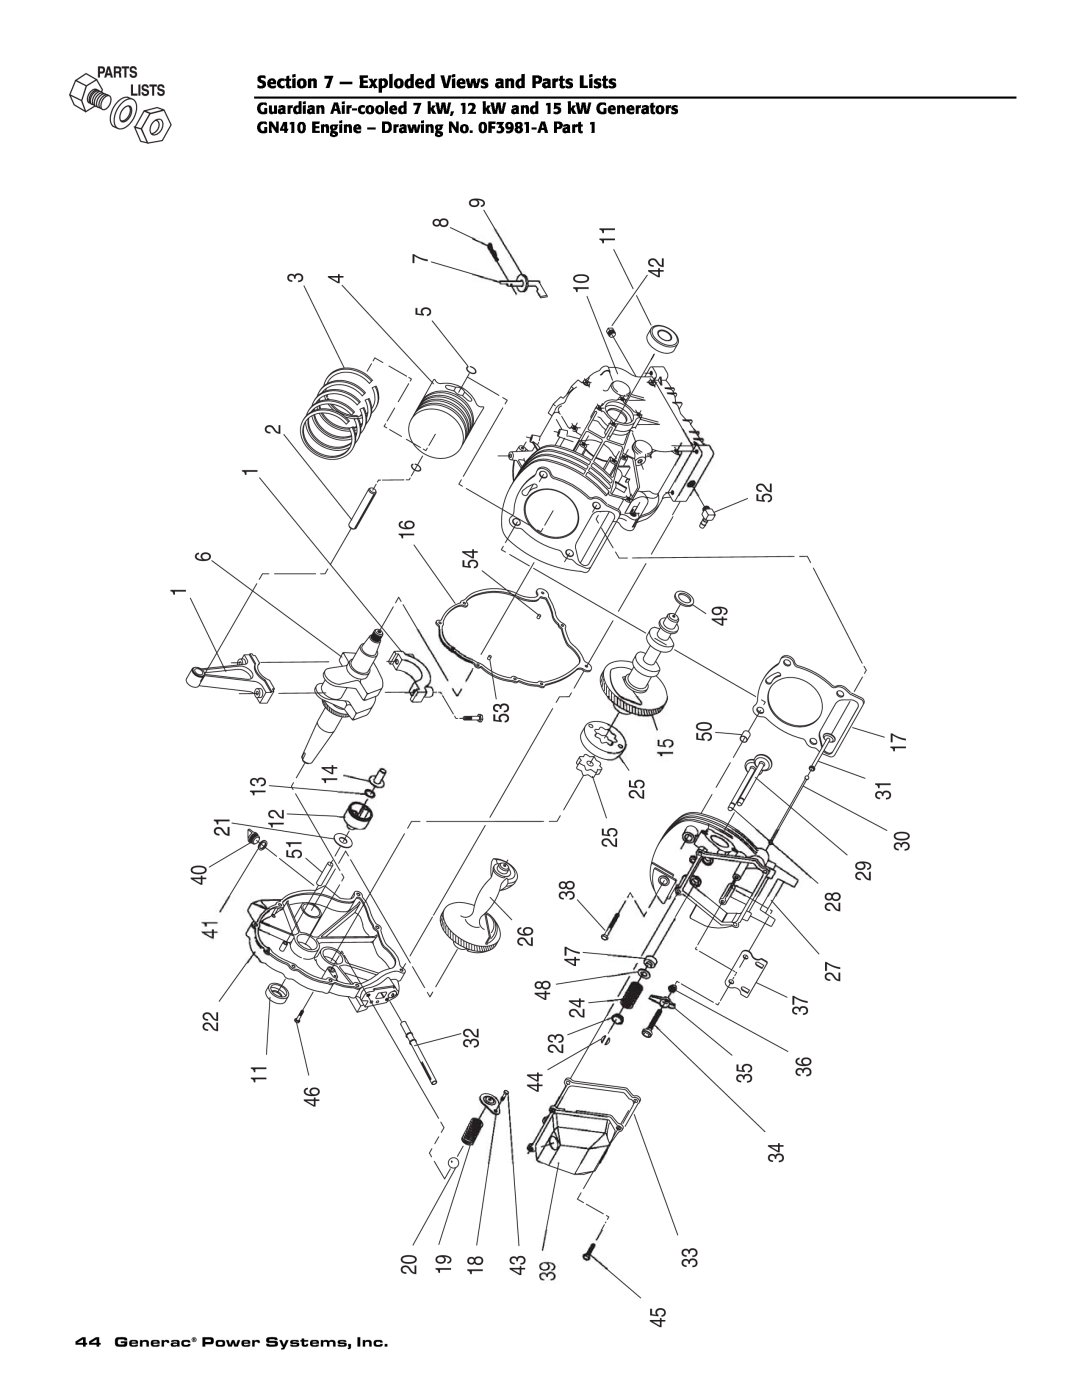 Guardian Technologies 04758-2, 04759-2, 04760-2 owner manual Exploded Views and Parts Lists, Generac Power Systems, Inc 